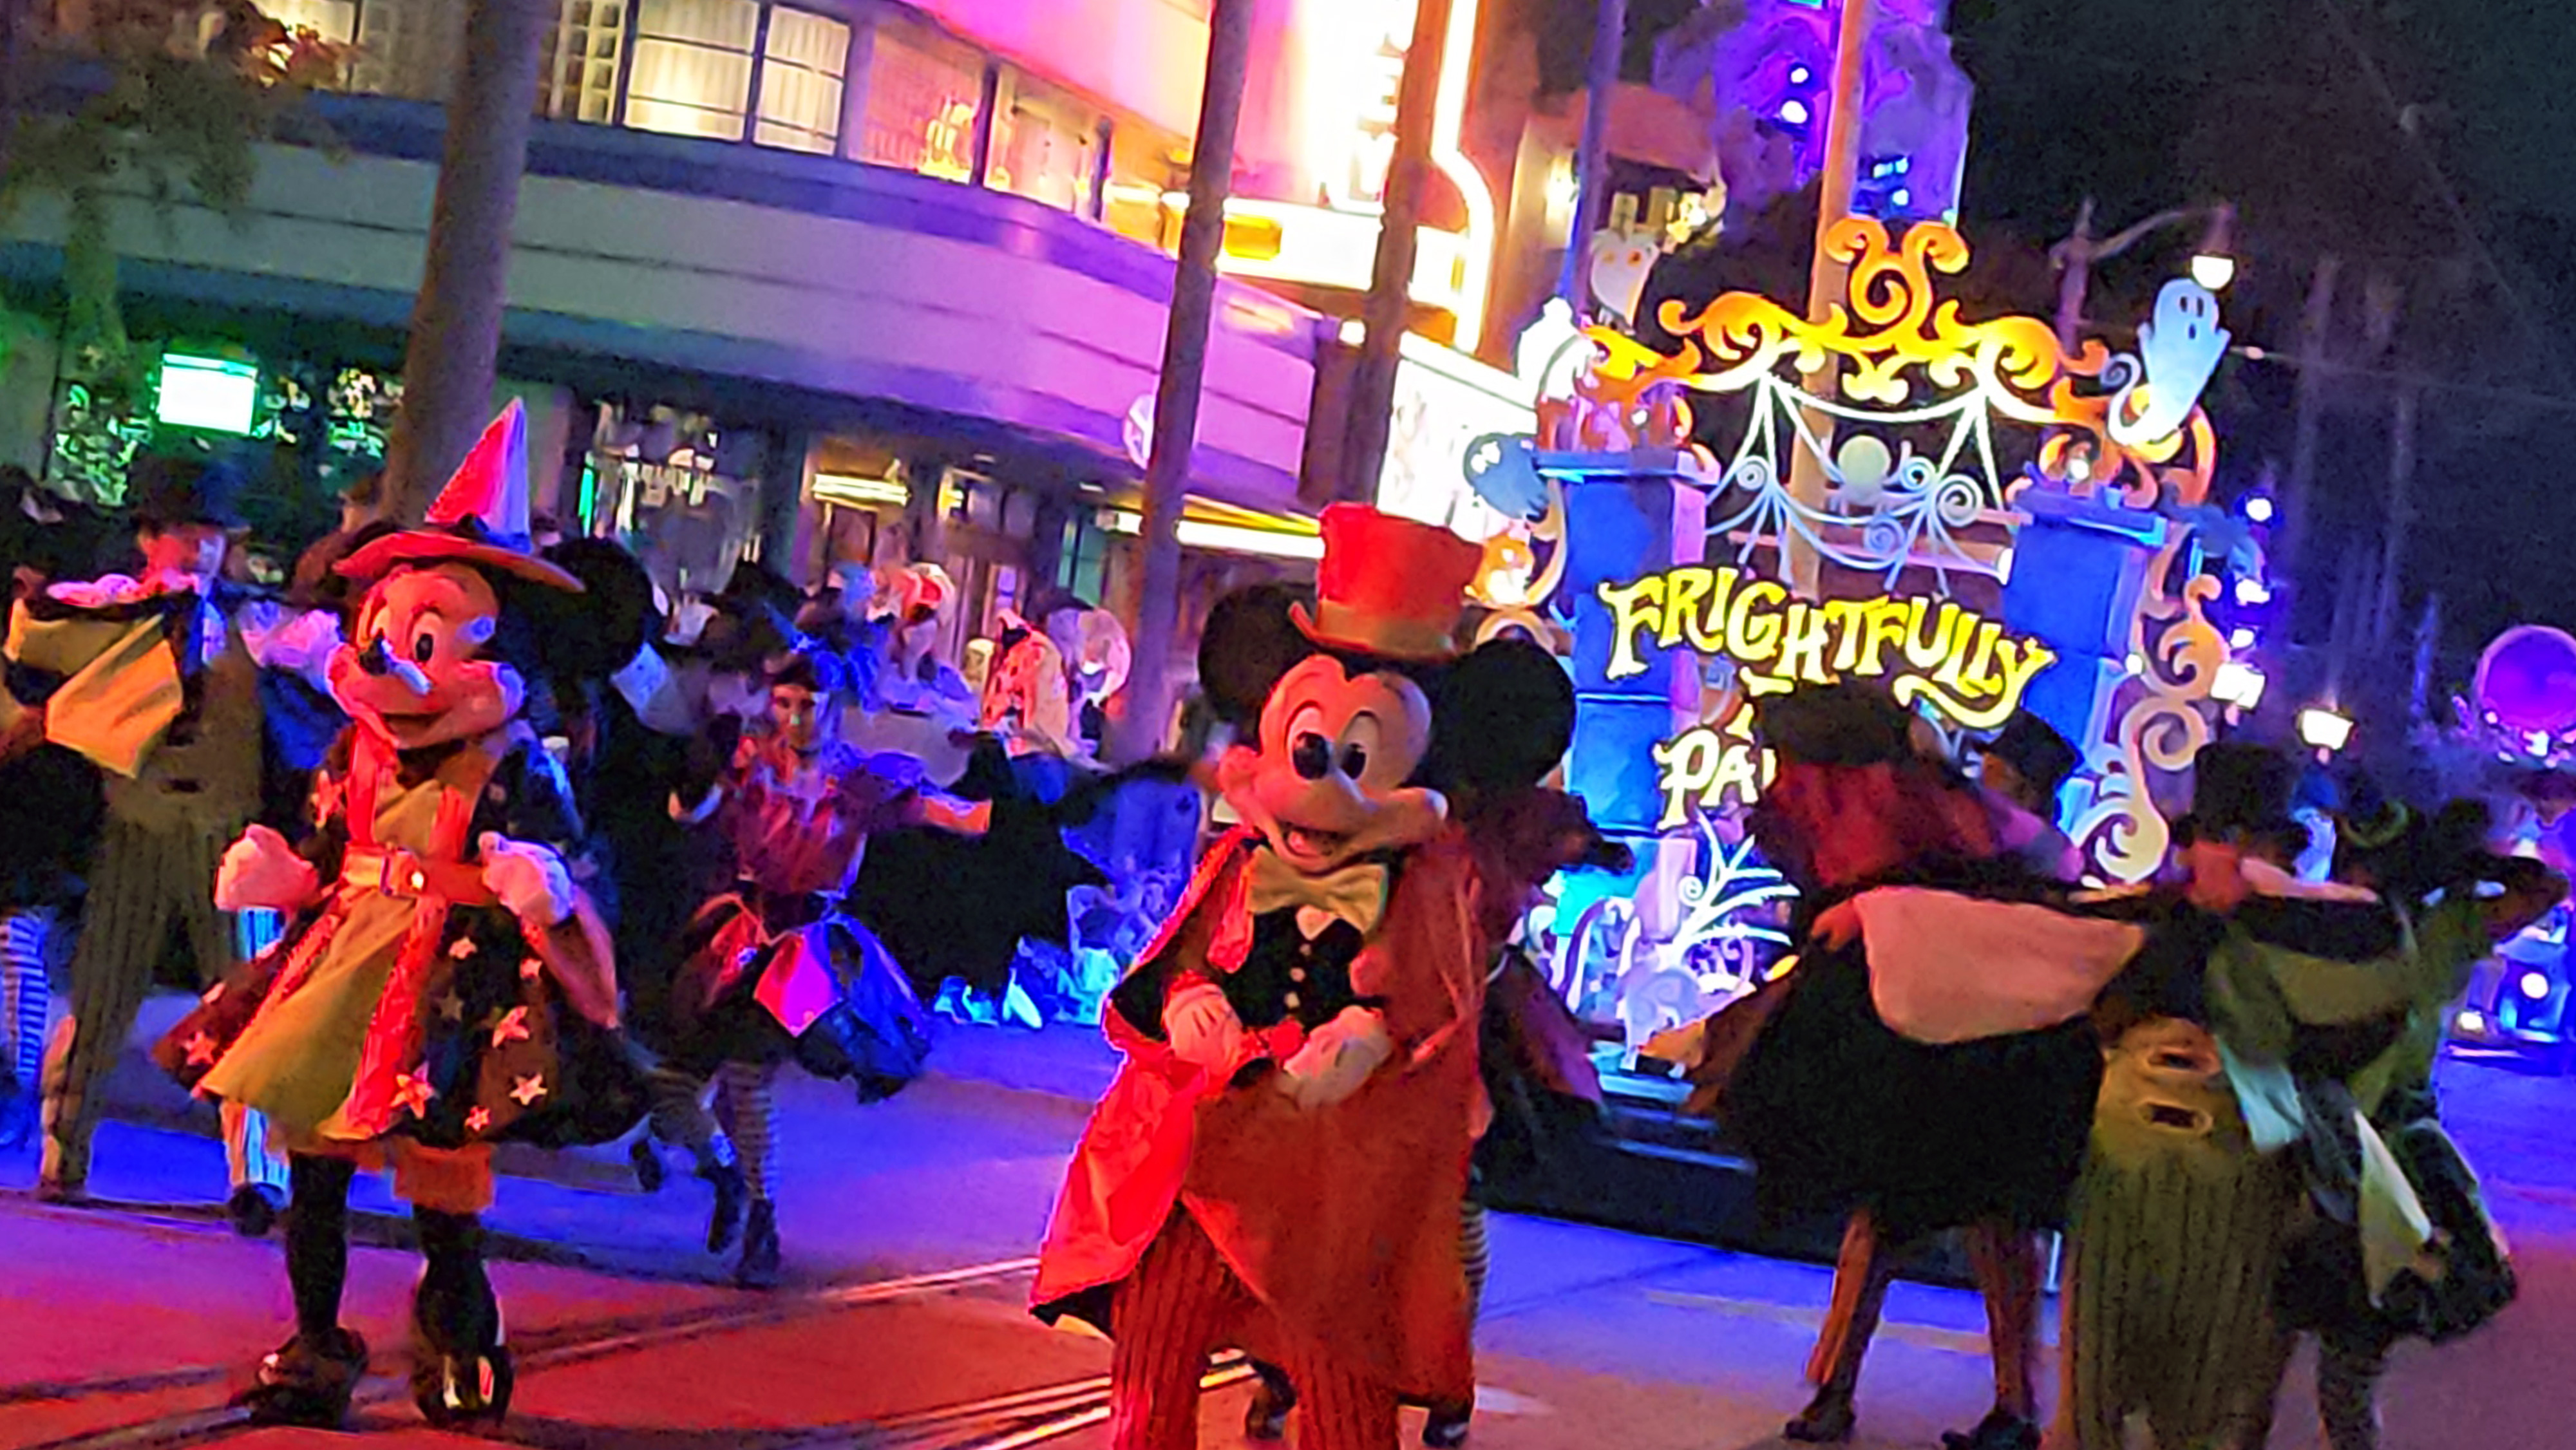 WATCH Disney’s Frightfully Fun Parade is a scream during Oogie Boogie